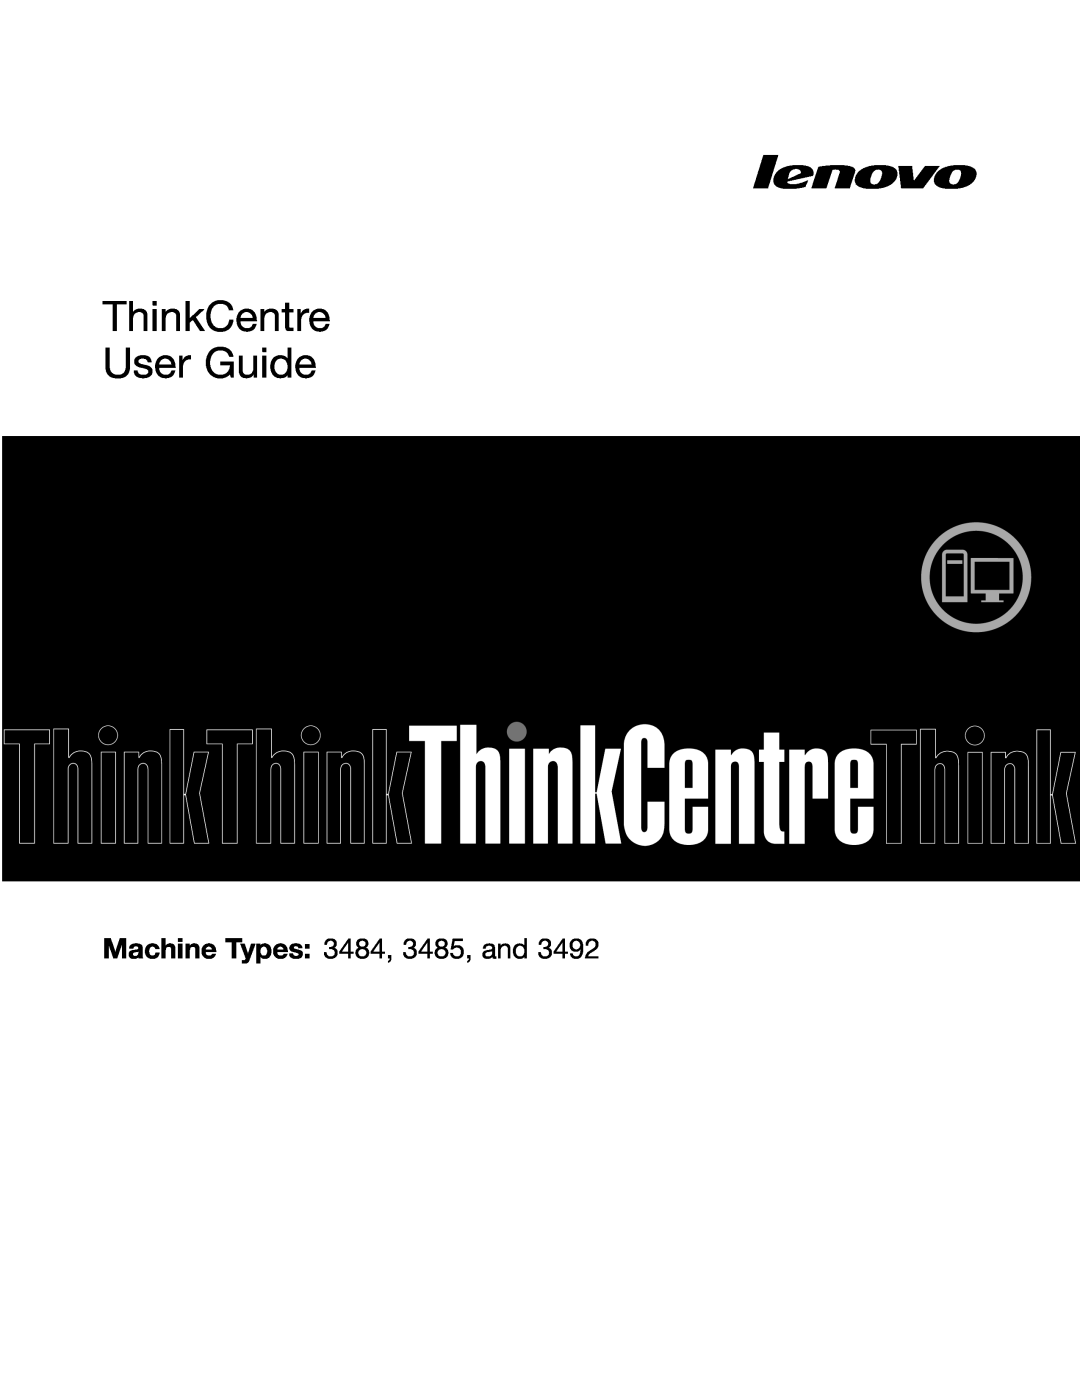 Lenovo 3484JMU manual ThinkCentre User Guide, Machine Types 3484, 3485, and 